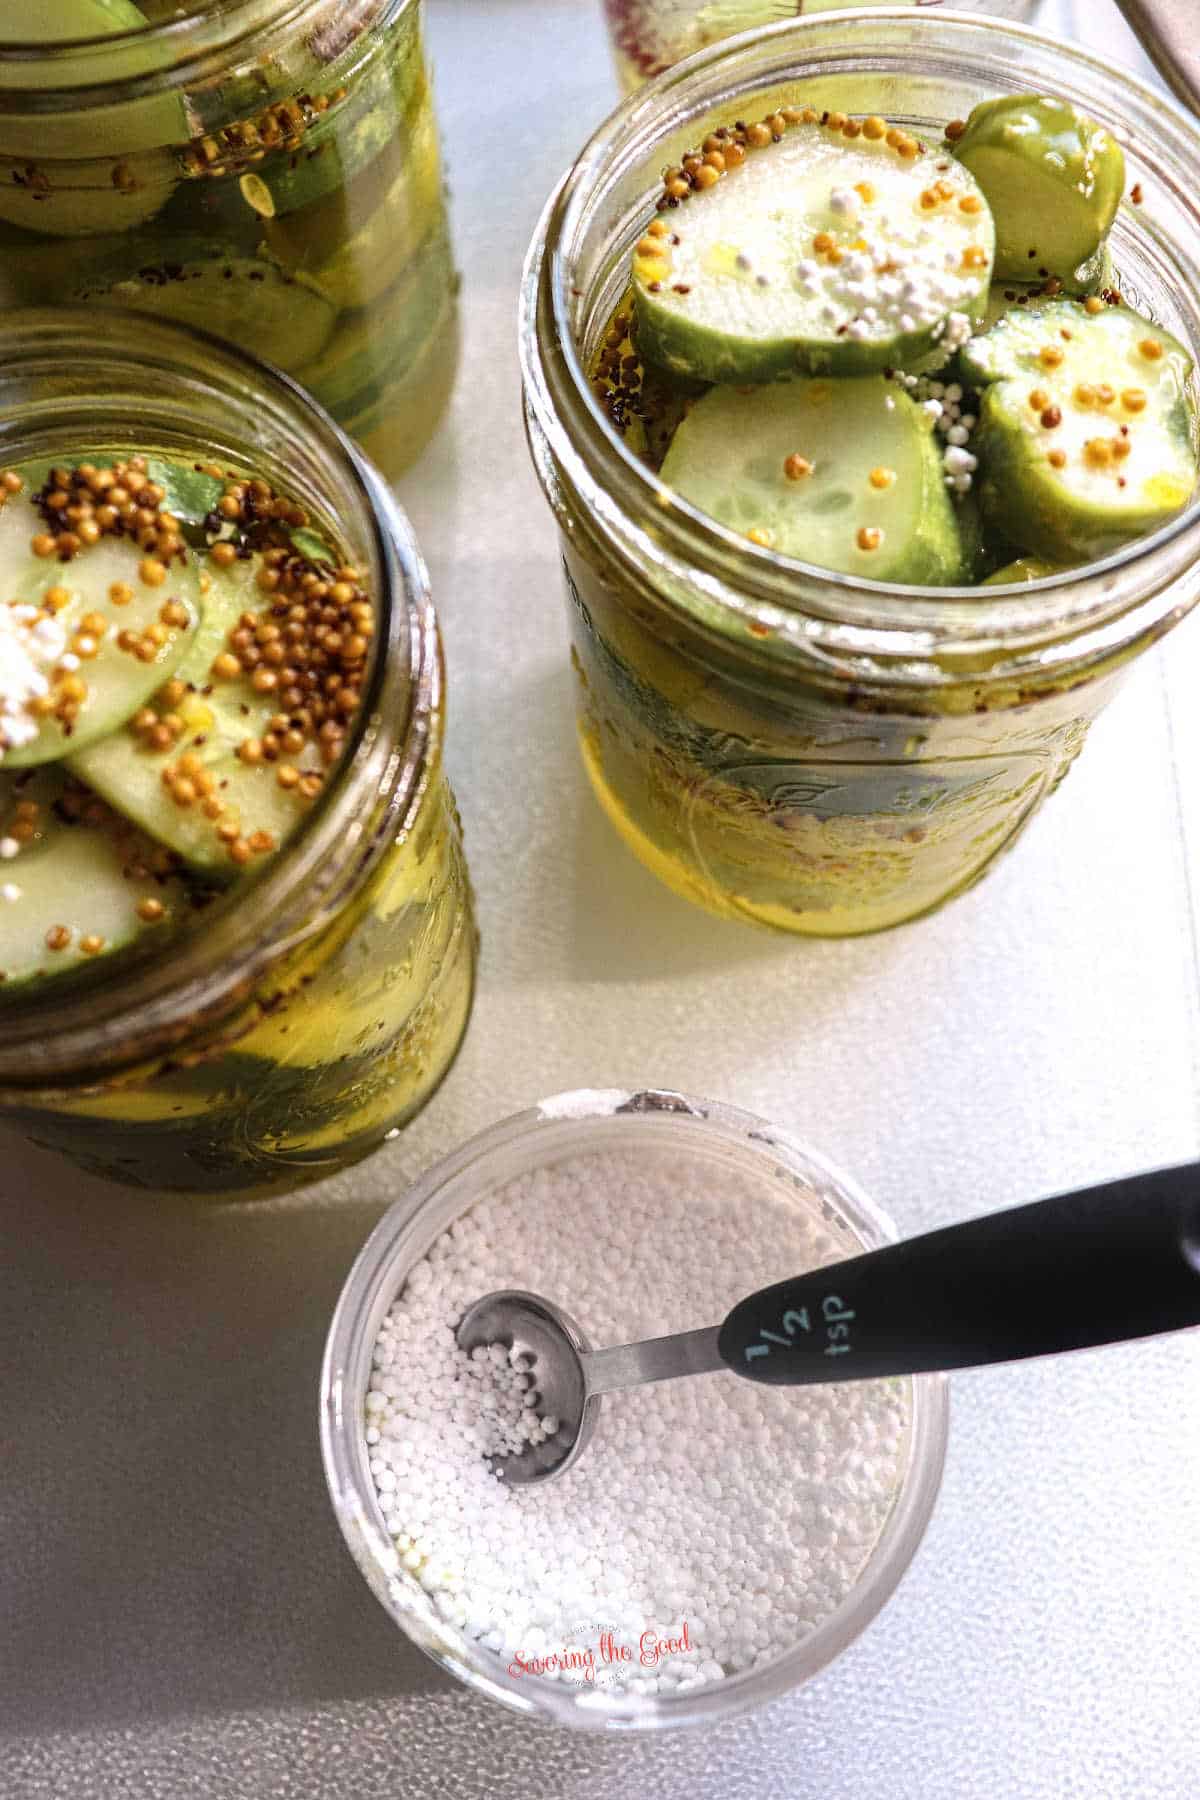 jar of extra crisp granuals with a 1:2 teaspoon in it, jars of pickles and spices